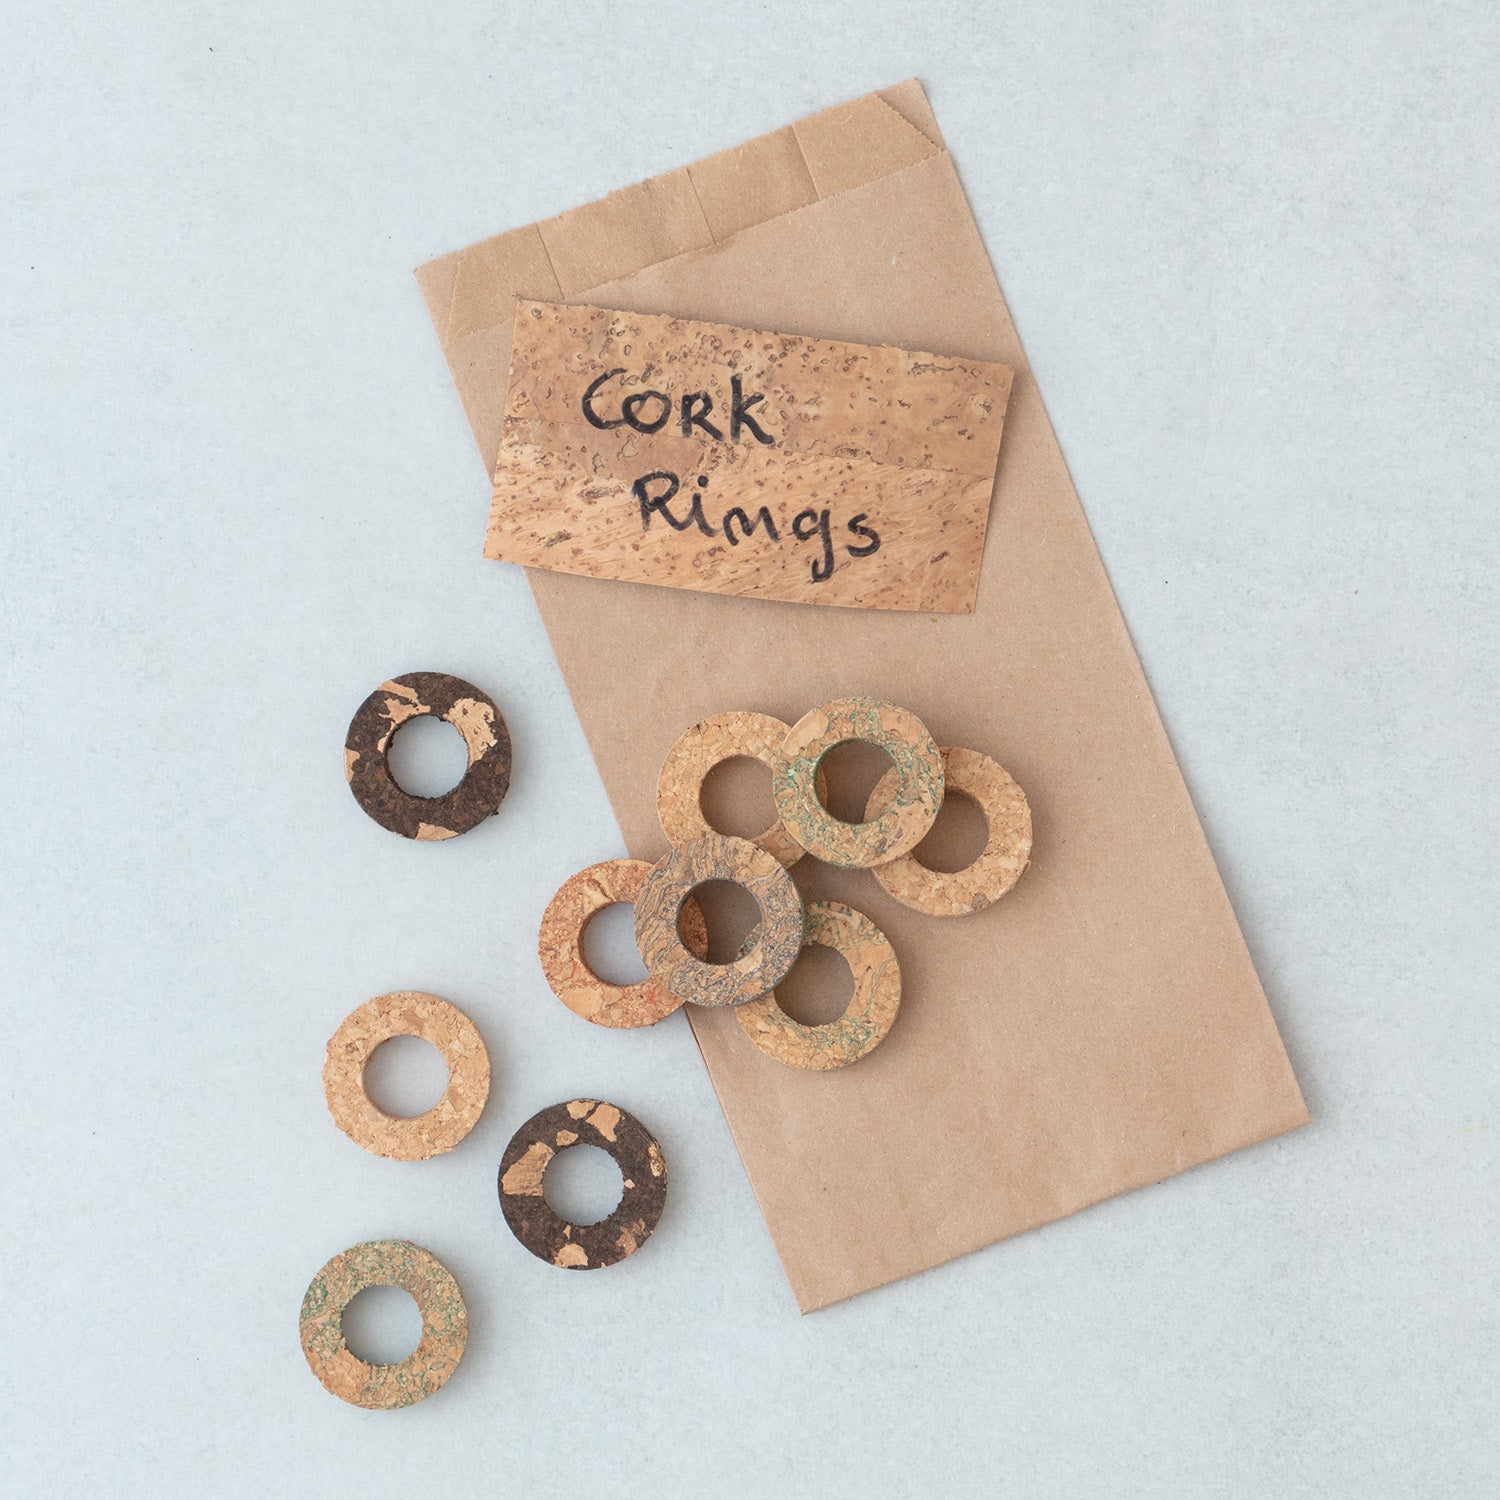 Coloured and natural cork rings